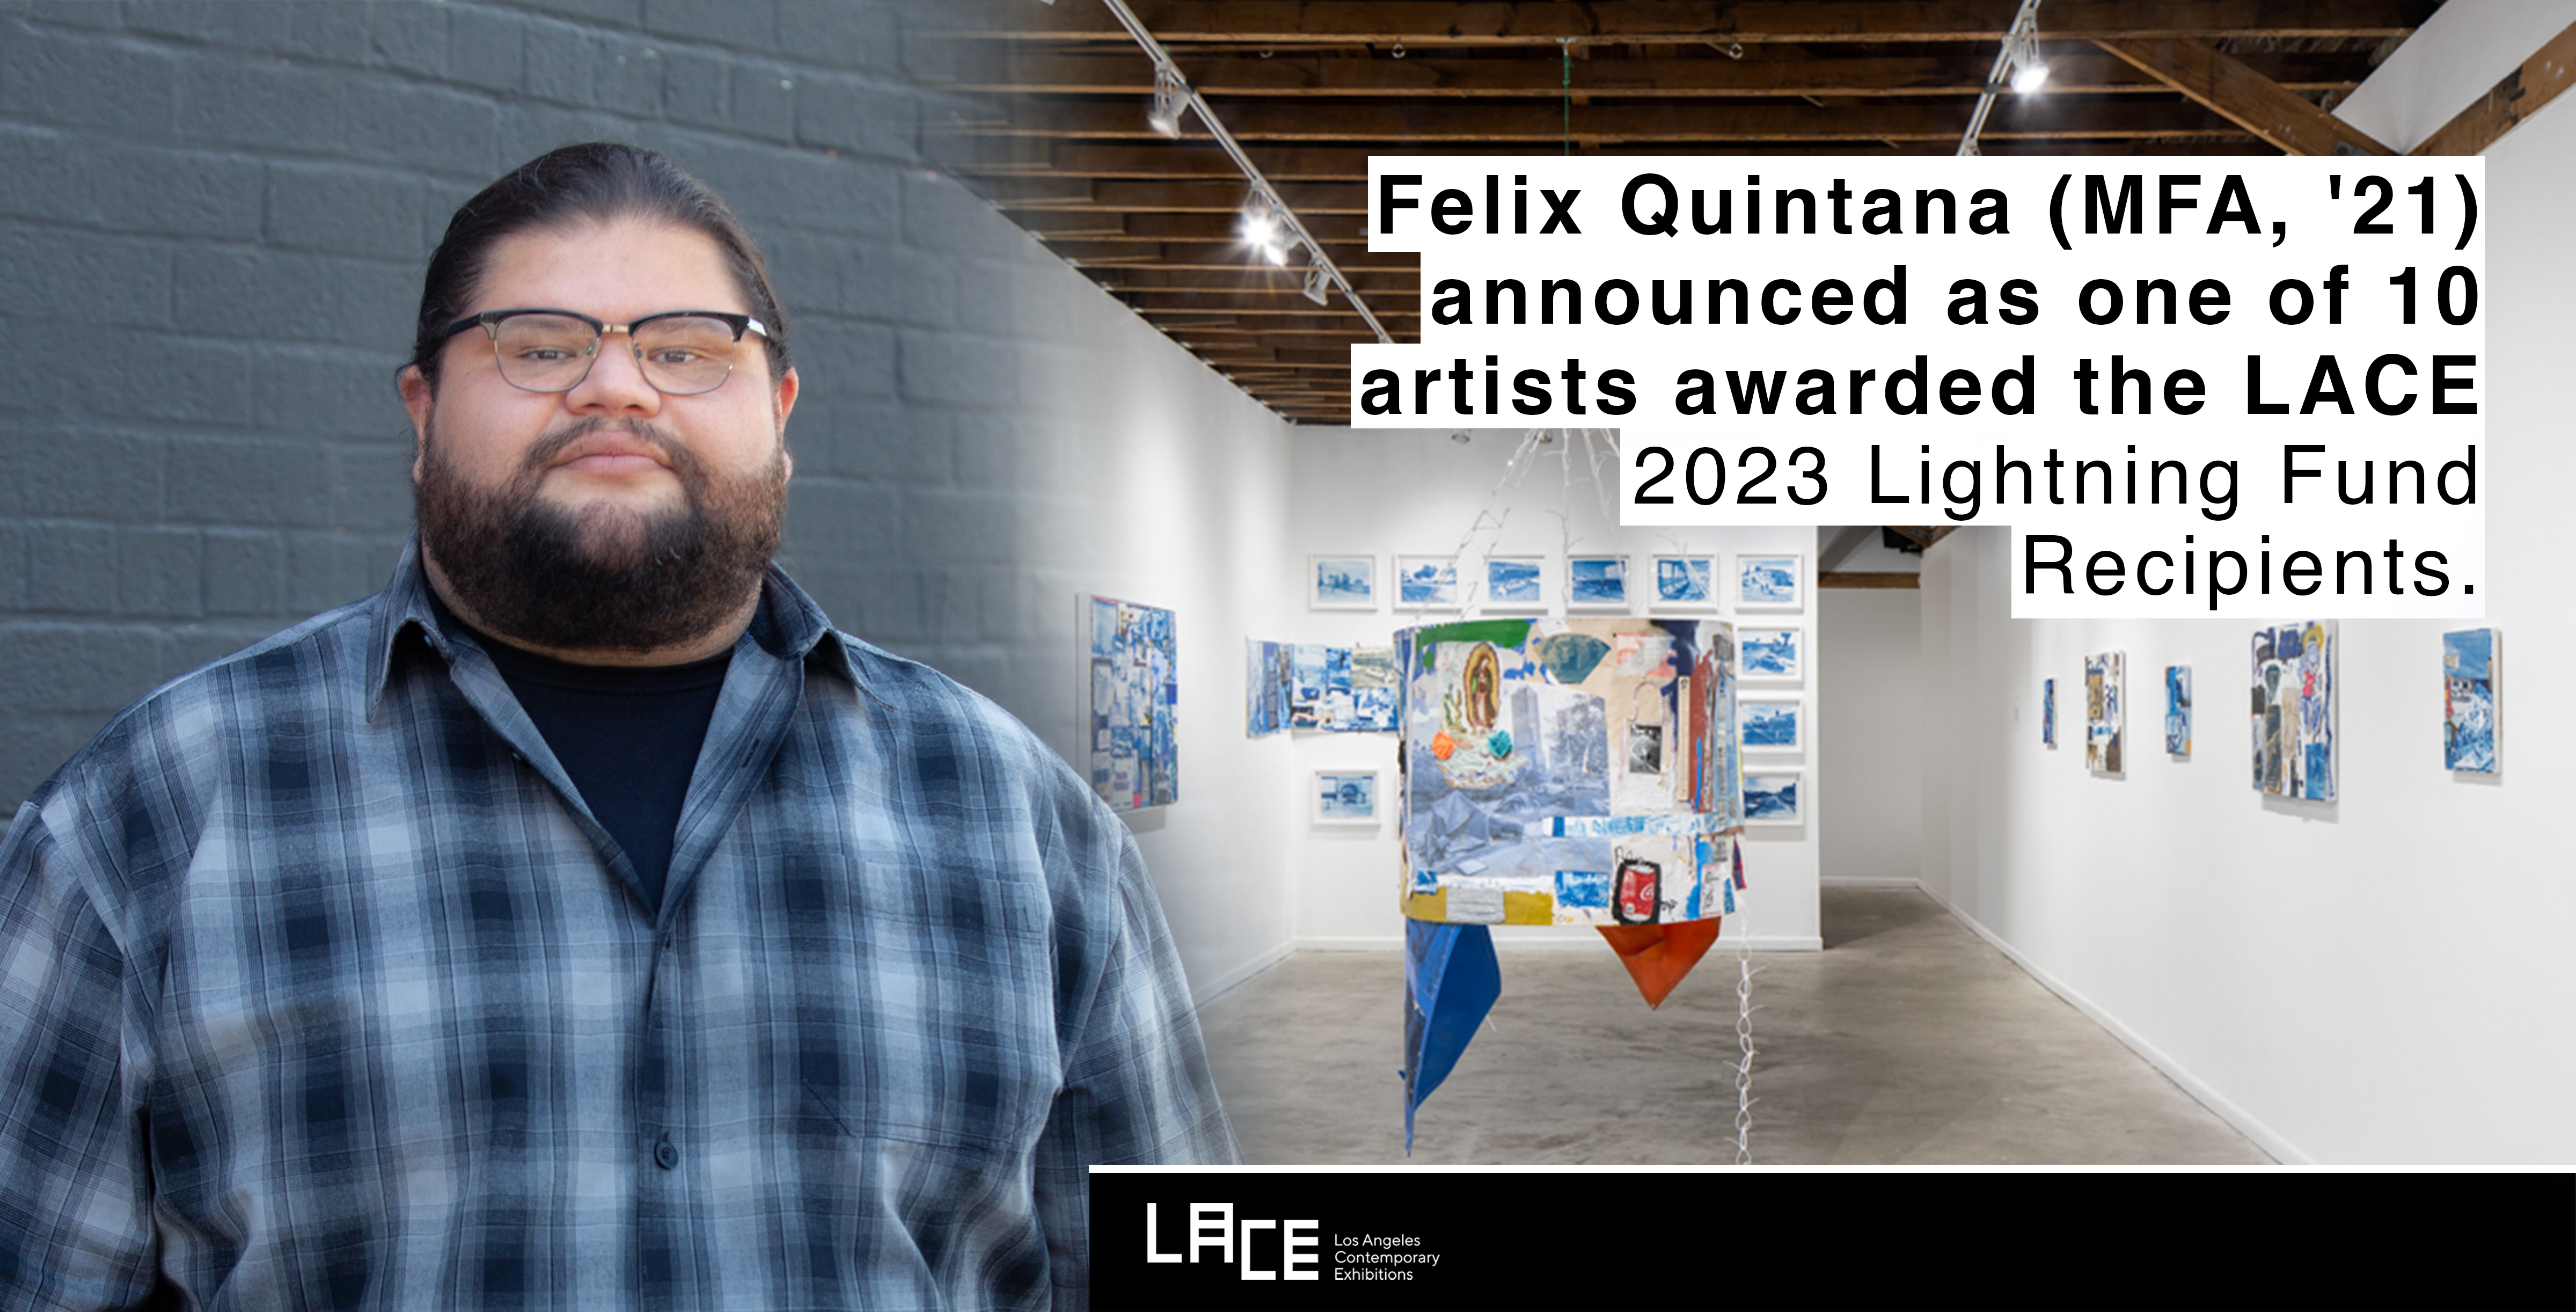 Student feature of Felix Quintana awarded the LACE for 2023.